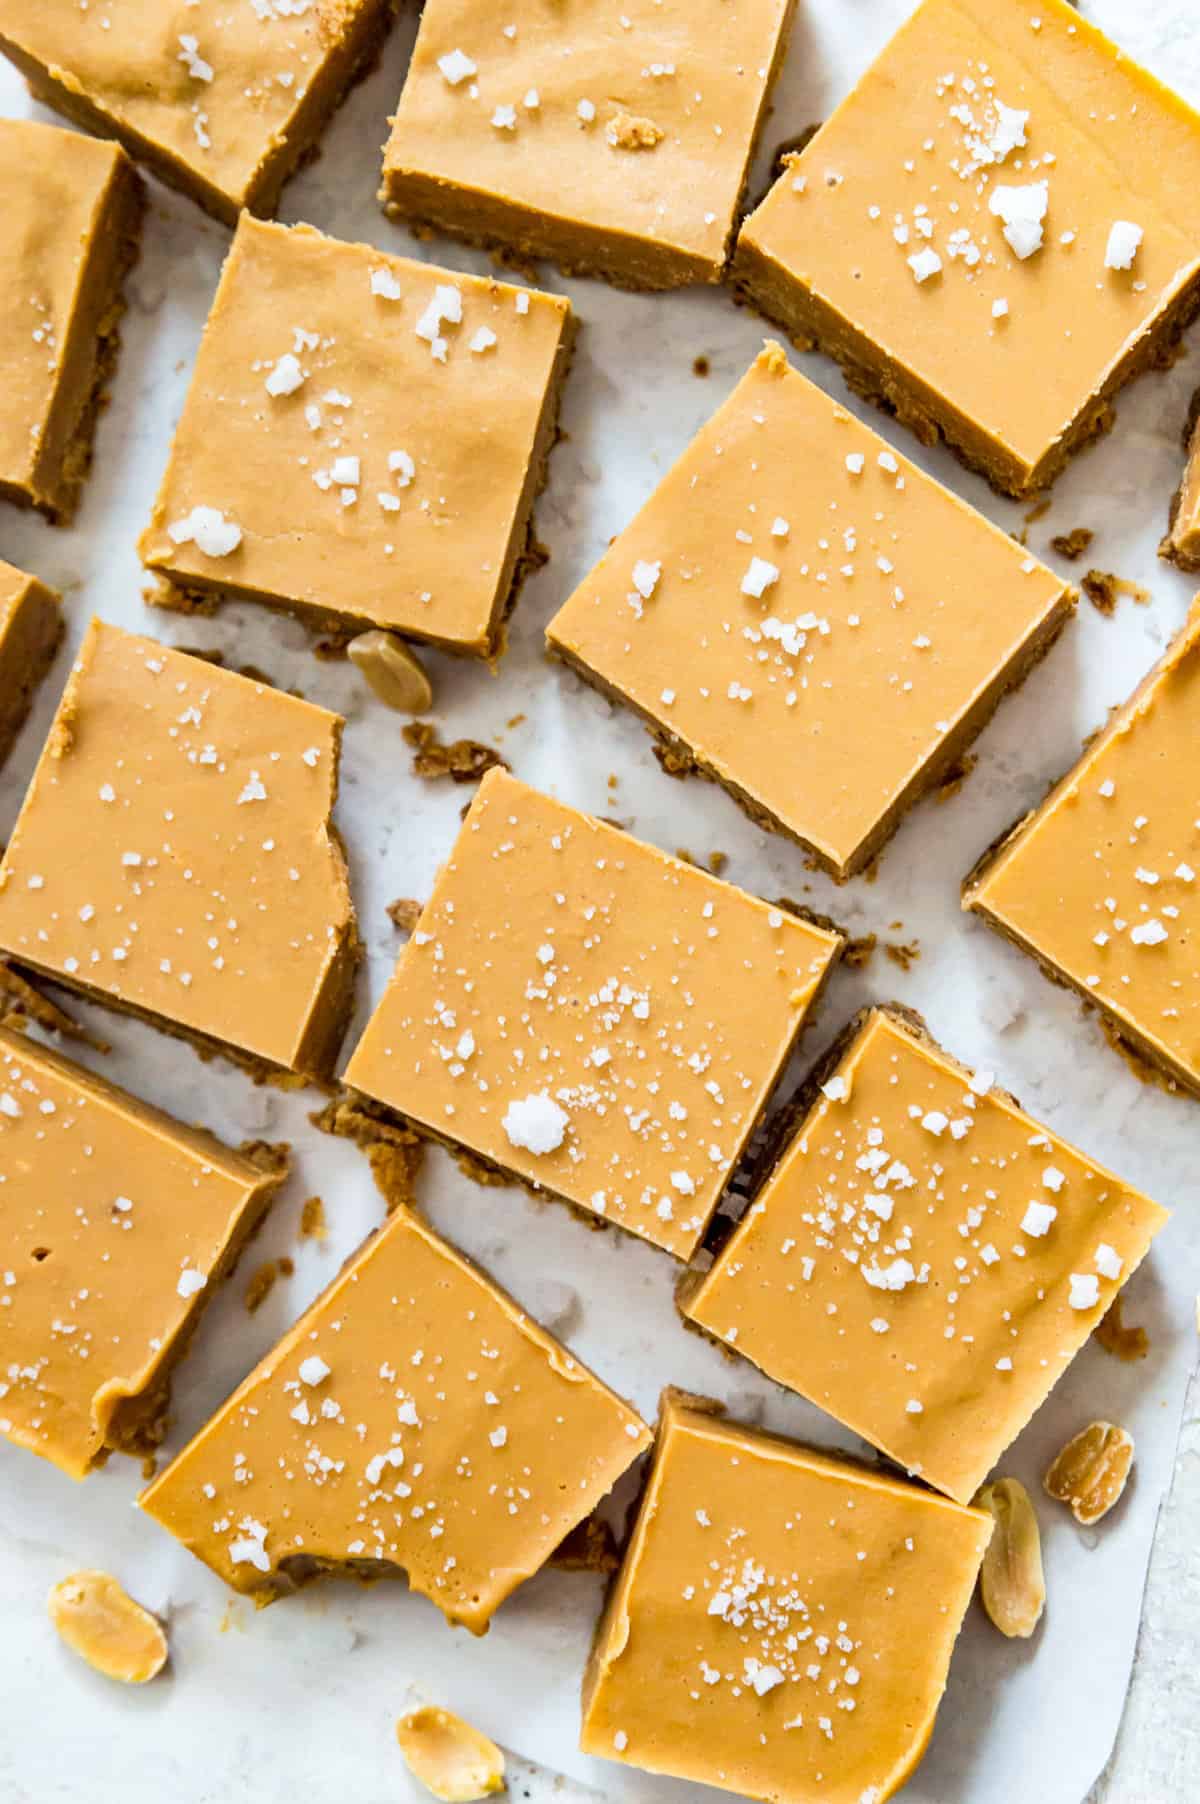 Peanut butter fudge cut into pieces and topped with coarse sea salt.